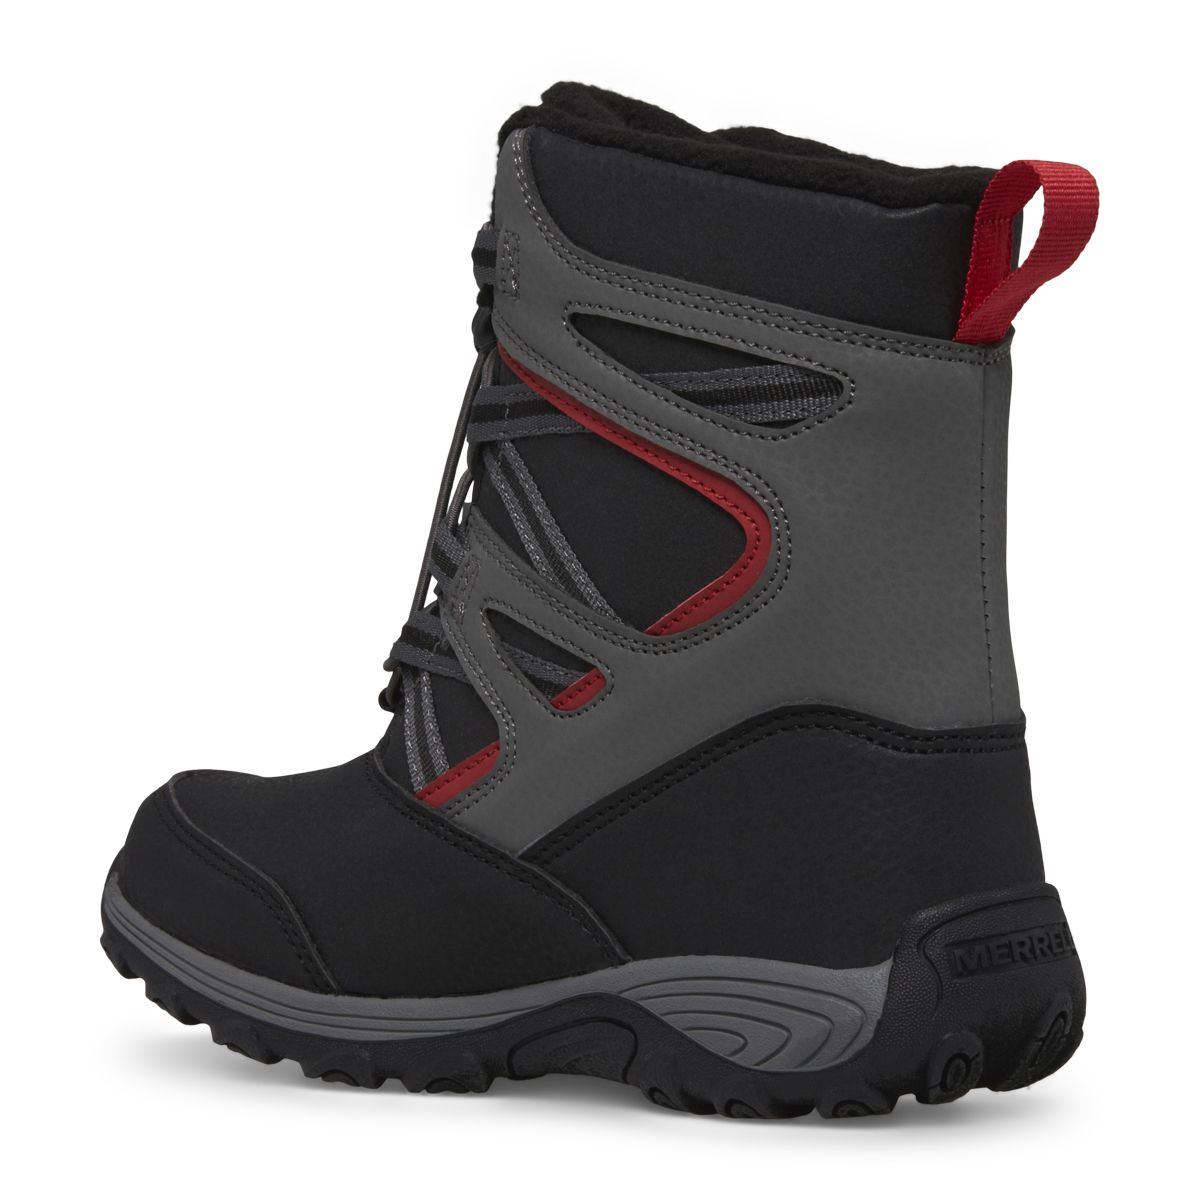 Outback Snow Boot 2.0 Waterproof, Grey/Black/Red, dynamic 5